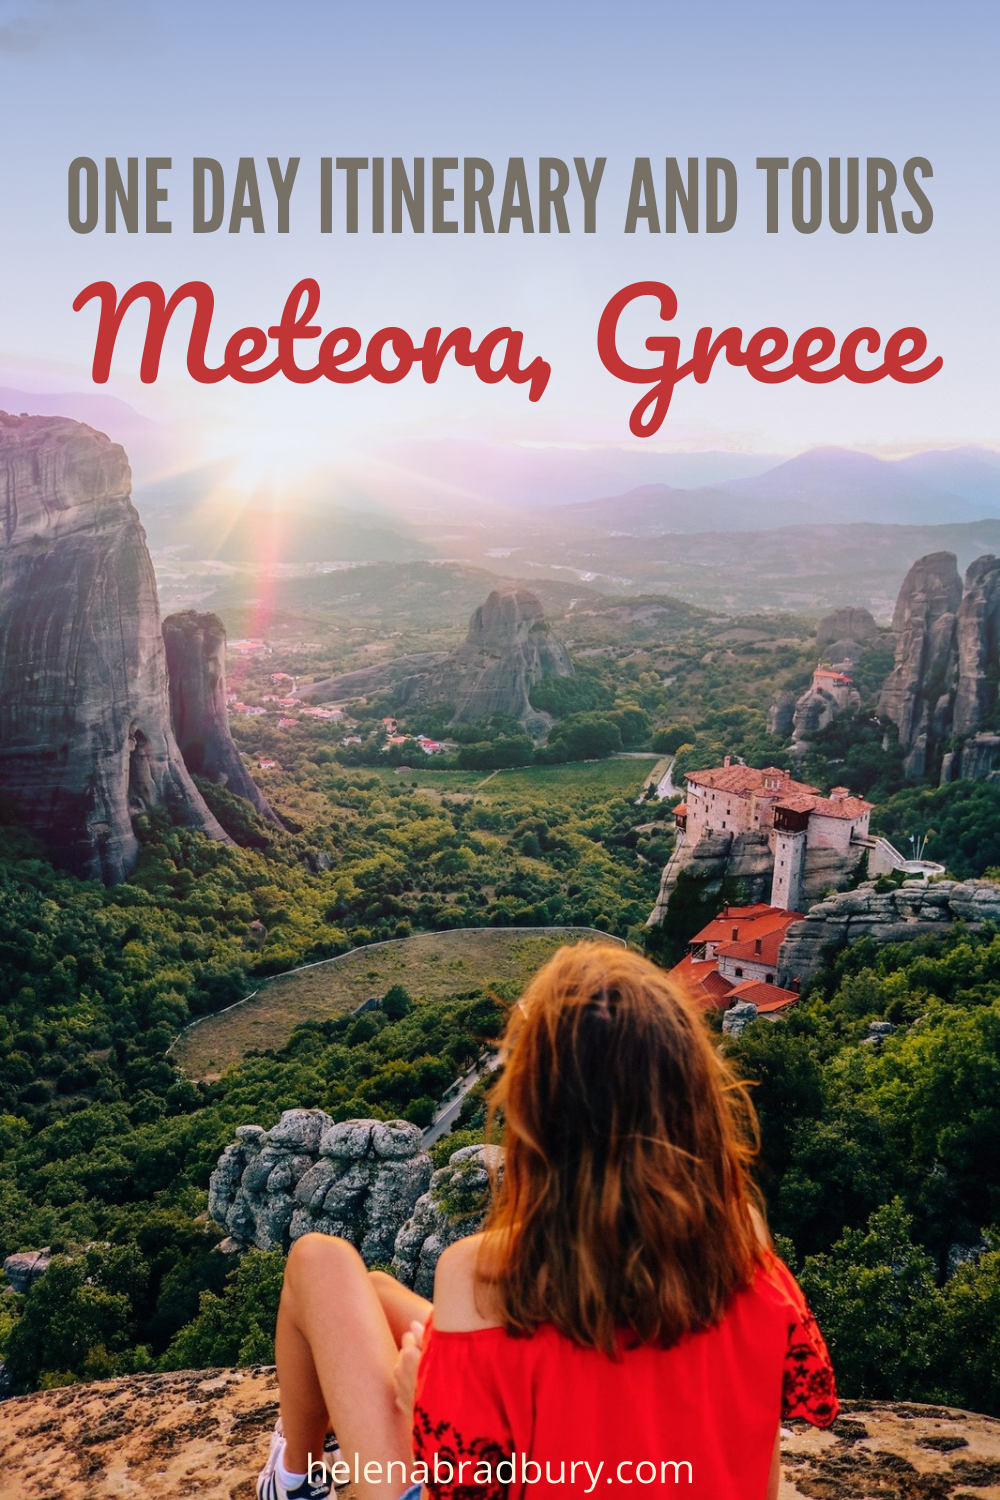 Planning a day trip from Thessaloniki to Meteora? These are your options for a day trip to Meteora based on your budget. If you’re looking for a Meteora day trip tour or to plan your own meteora travel itinerary, this guide covers it all for you and…